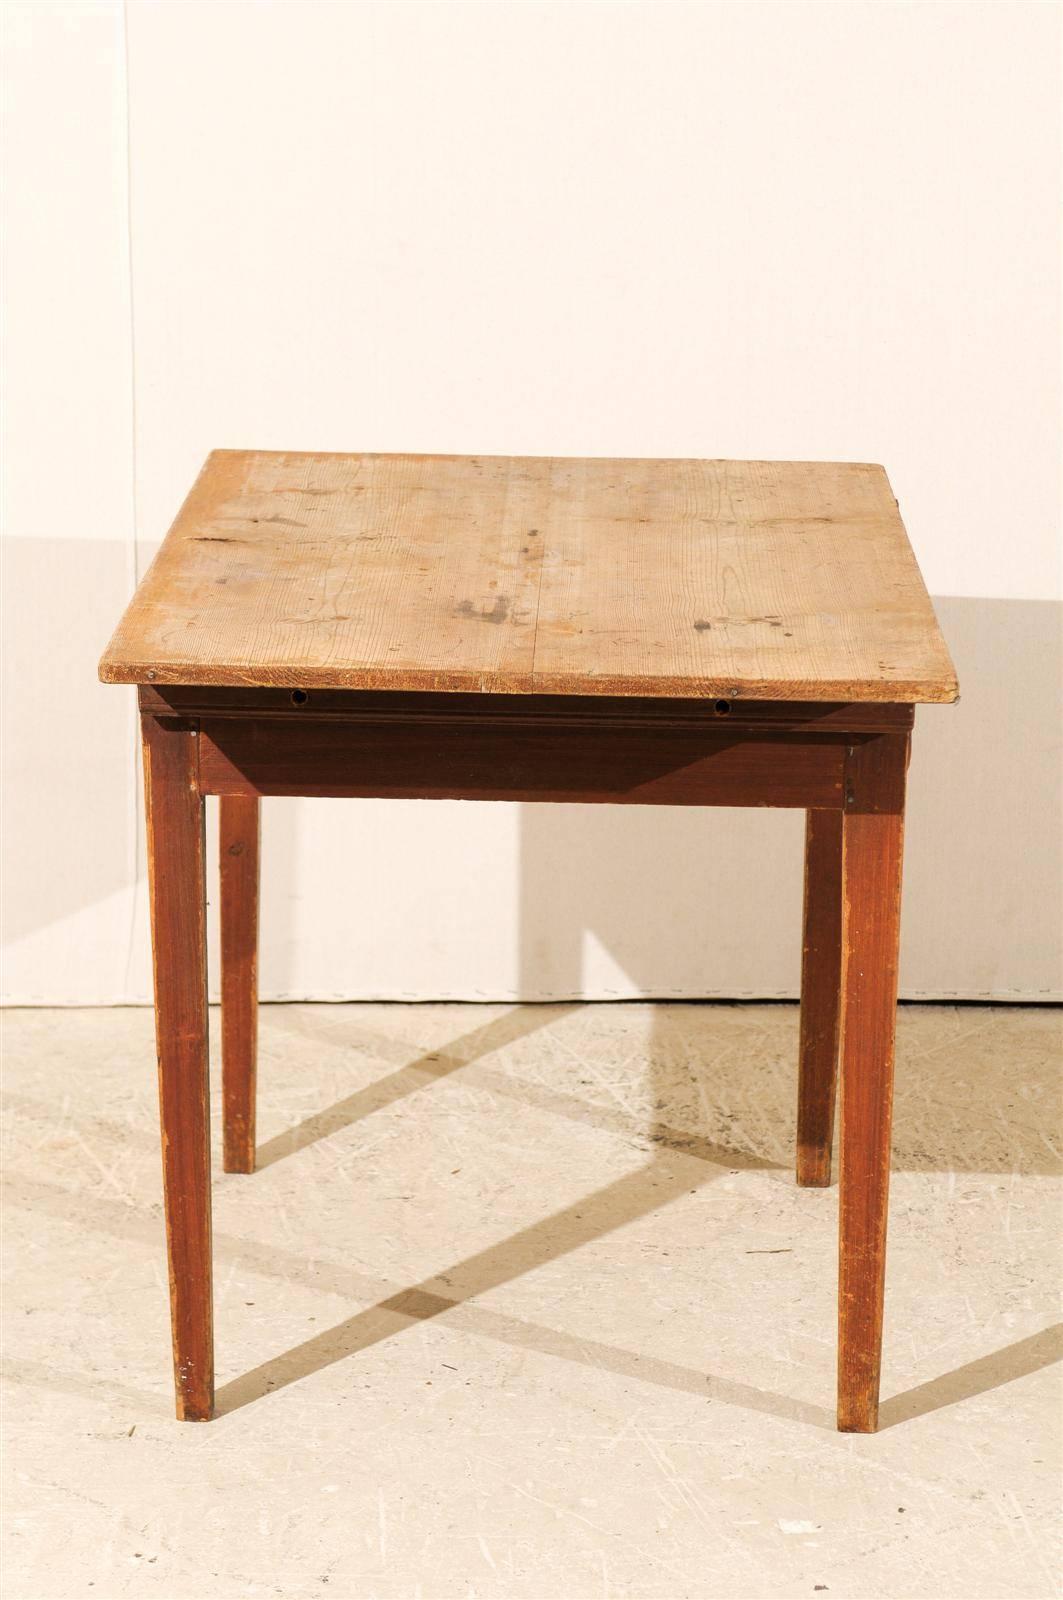 Swedish Single-Drawer Wooden Table, Clean and Simple Lines, Mid-19th Century For Sale 3